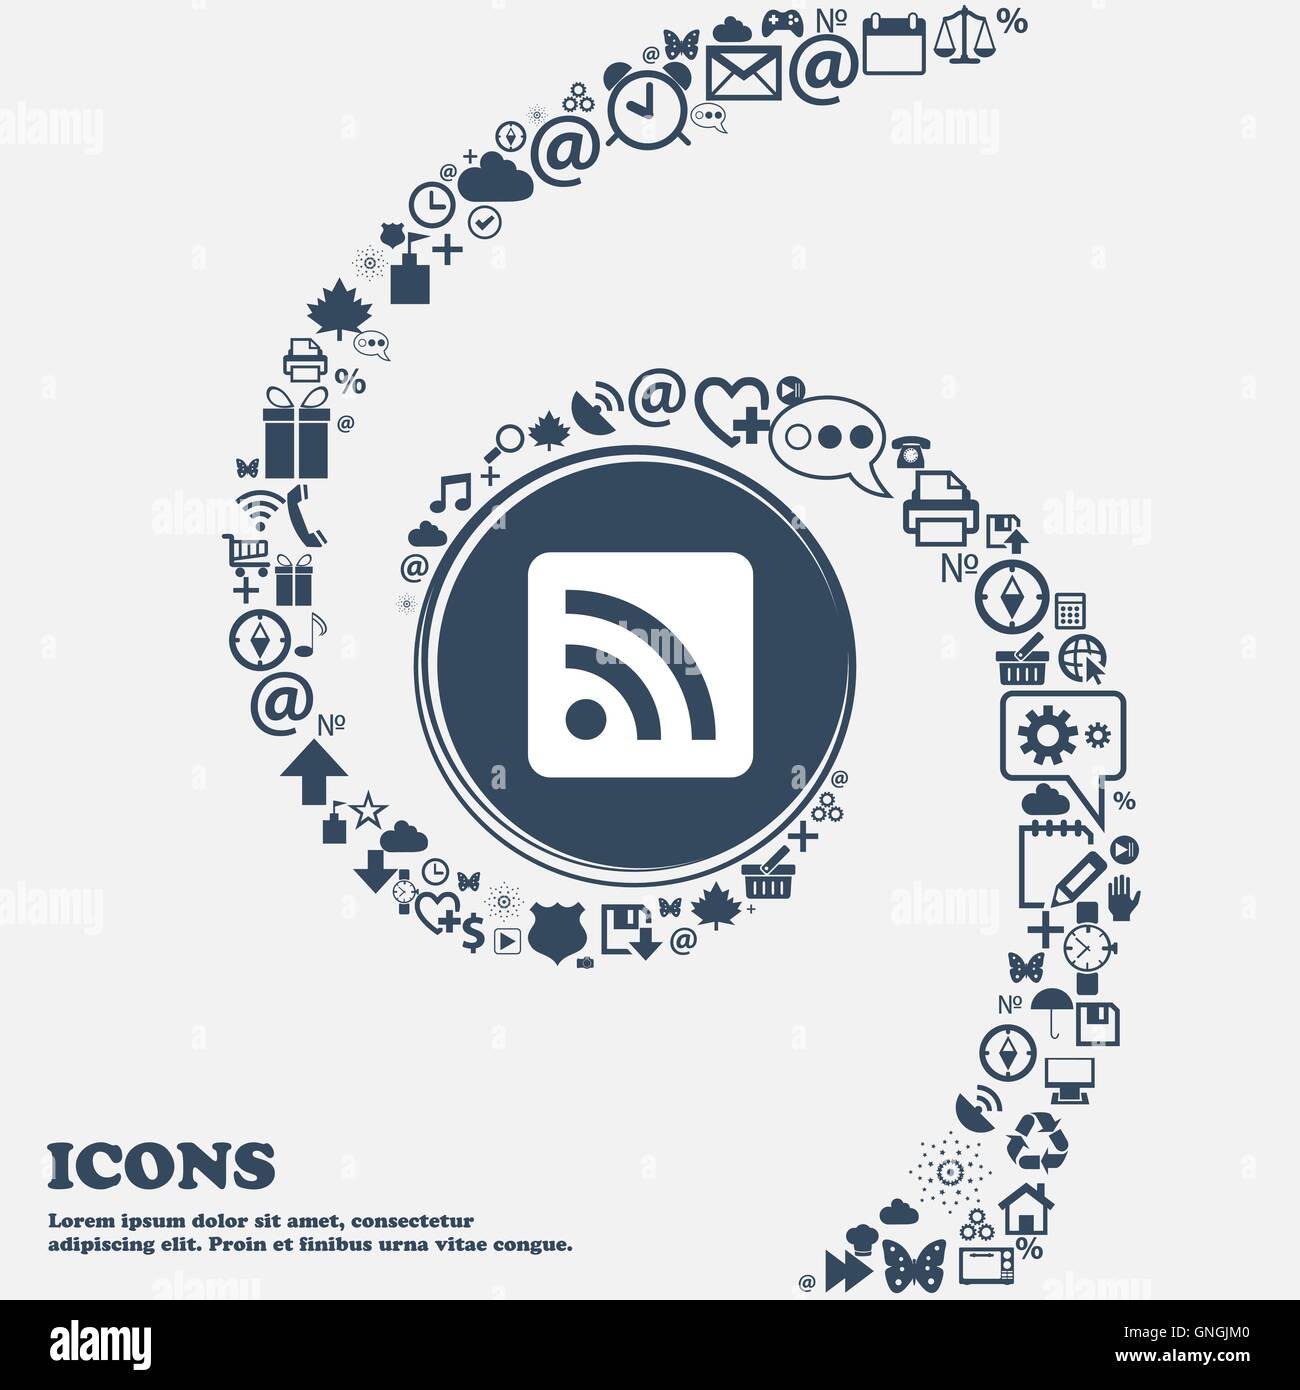 RSS feed icon sign in the center. Around the many beautiful symbols twisted in a spiral. You can use each separately for your de Stock Vector